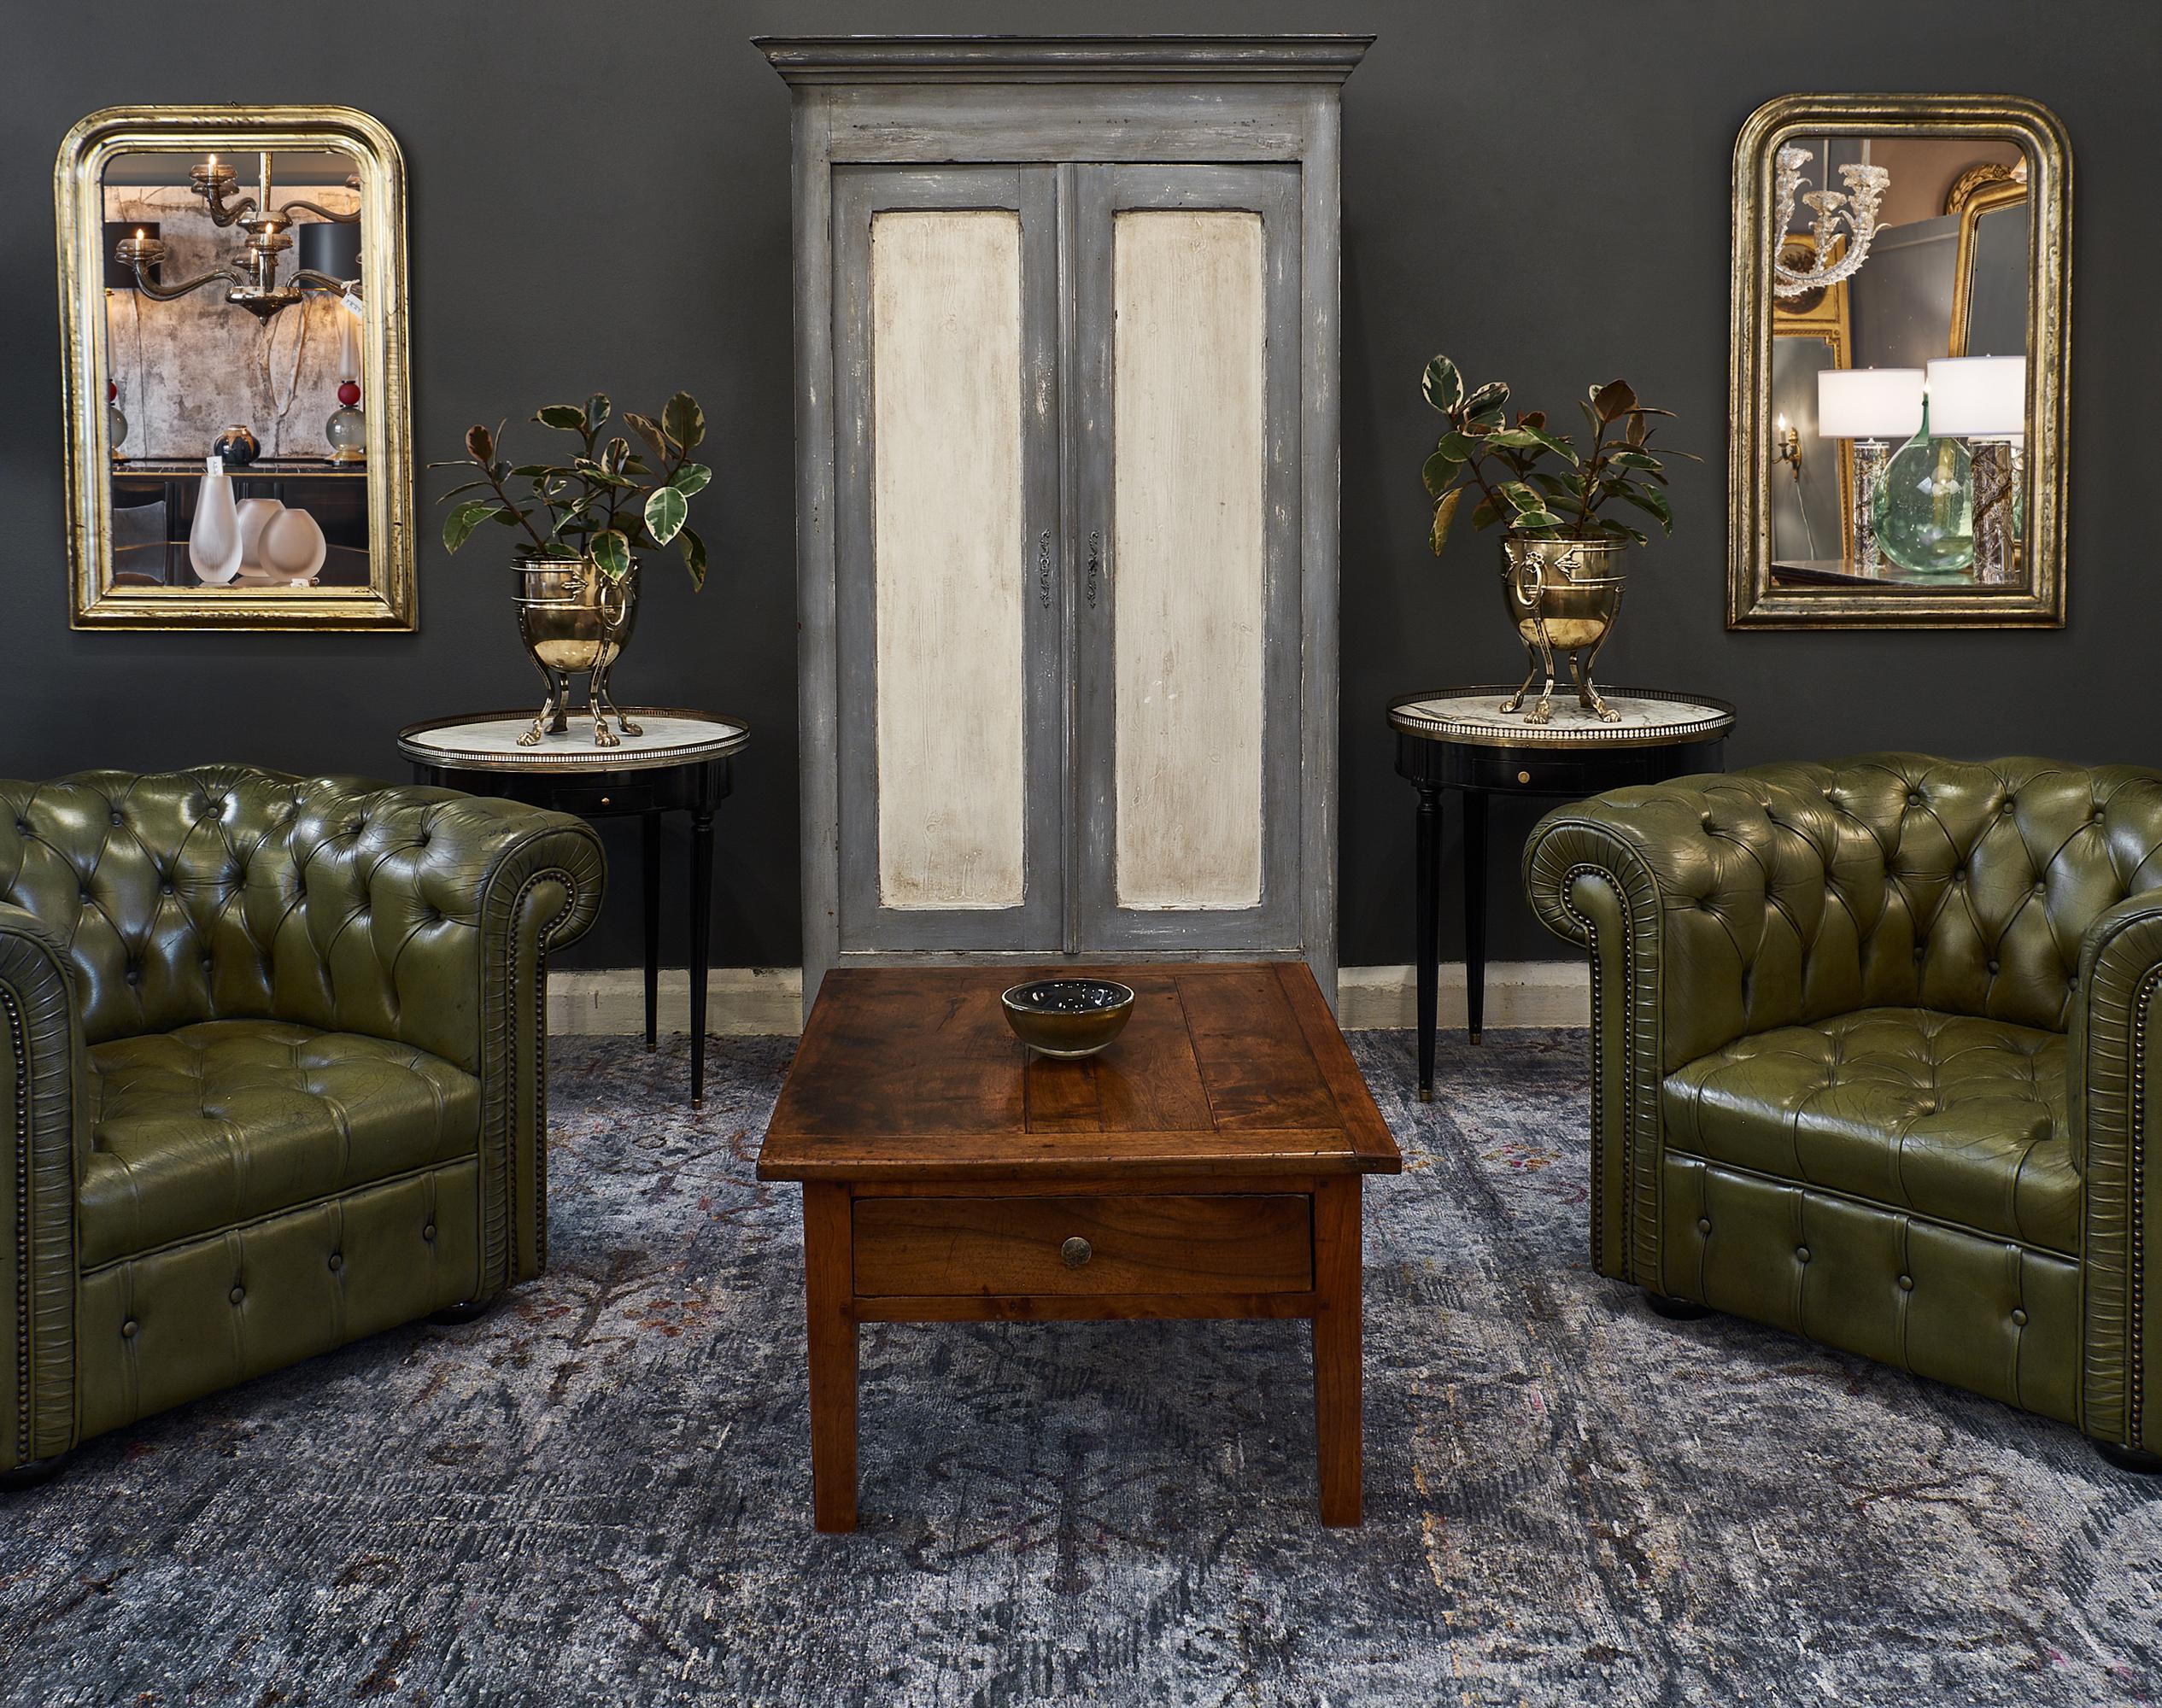 A pair of superb chesterfield armchairs in very nice condition, rich green patinated leather, brass nails heads. We loved the reasonable size, versatility of the style and high quality of the craftsmanship.